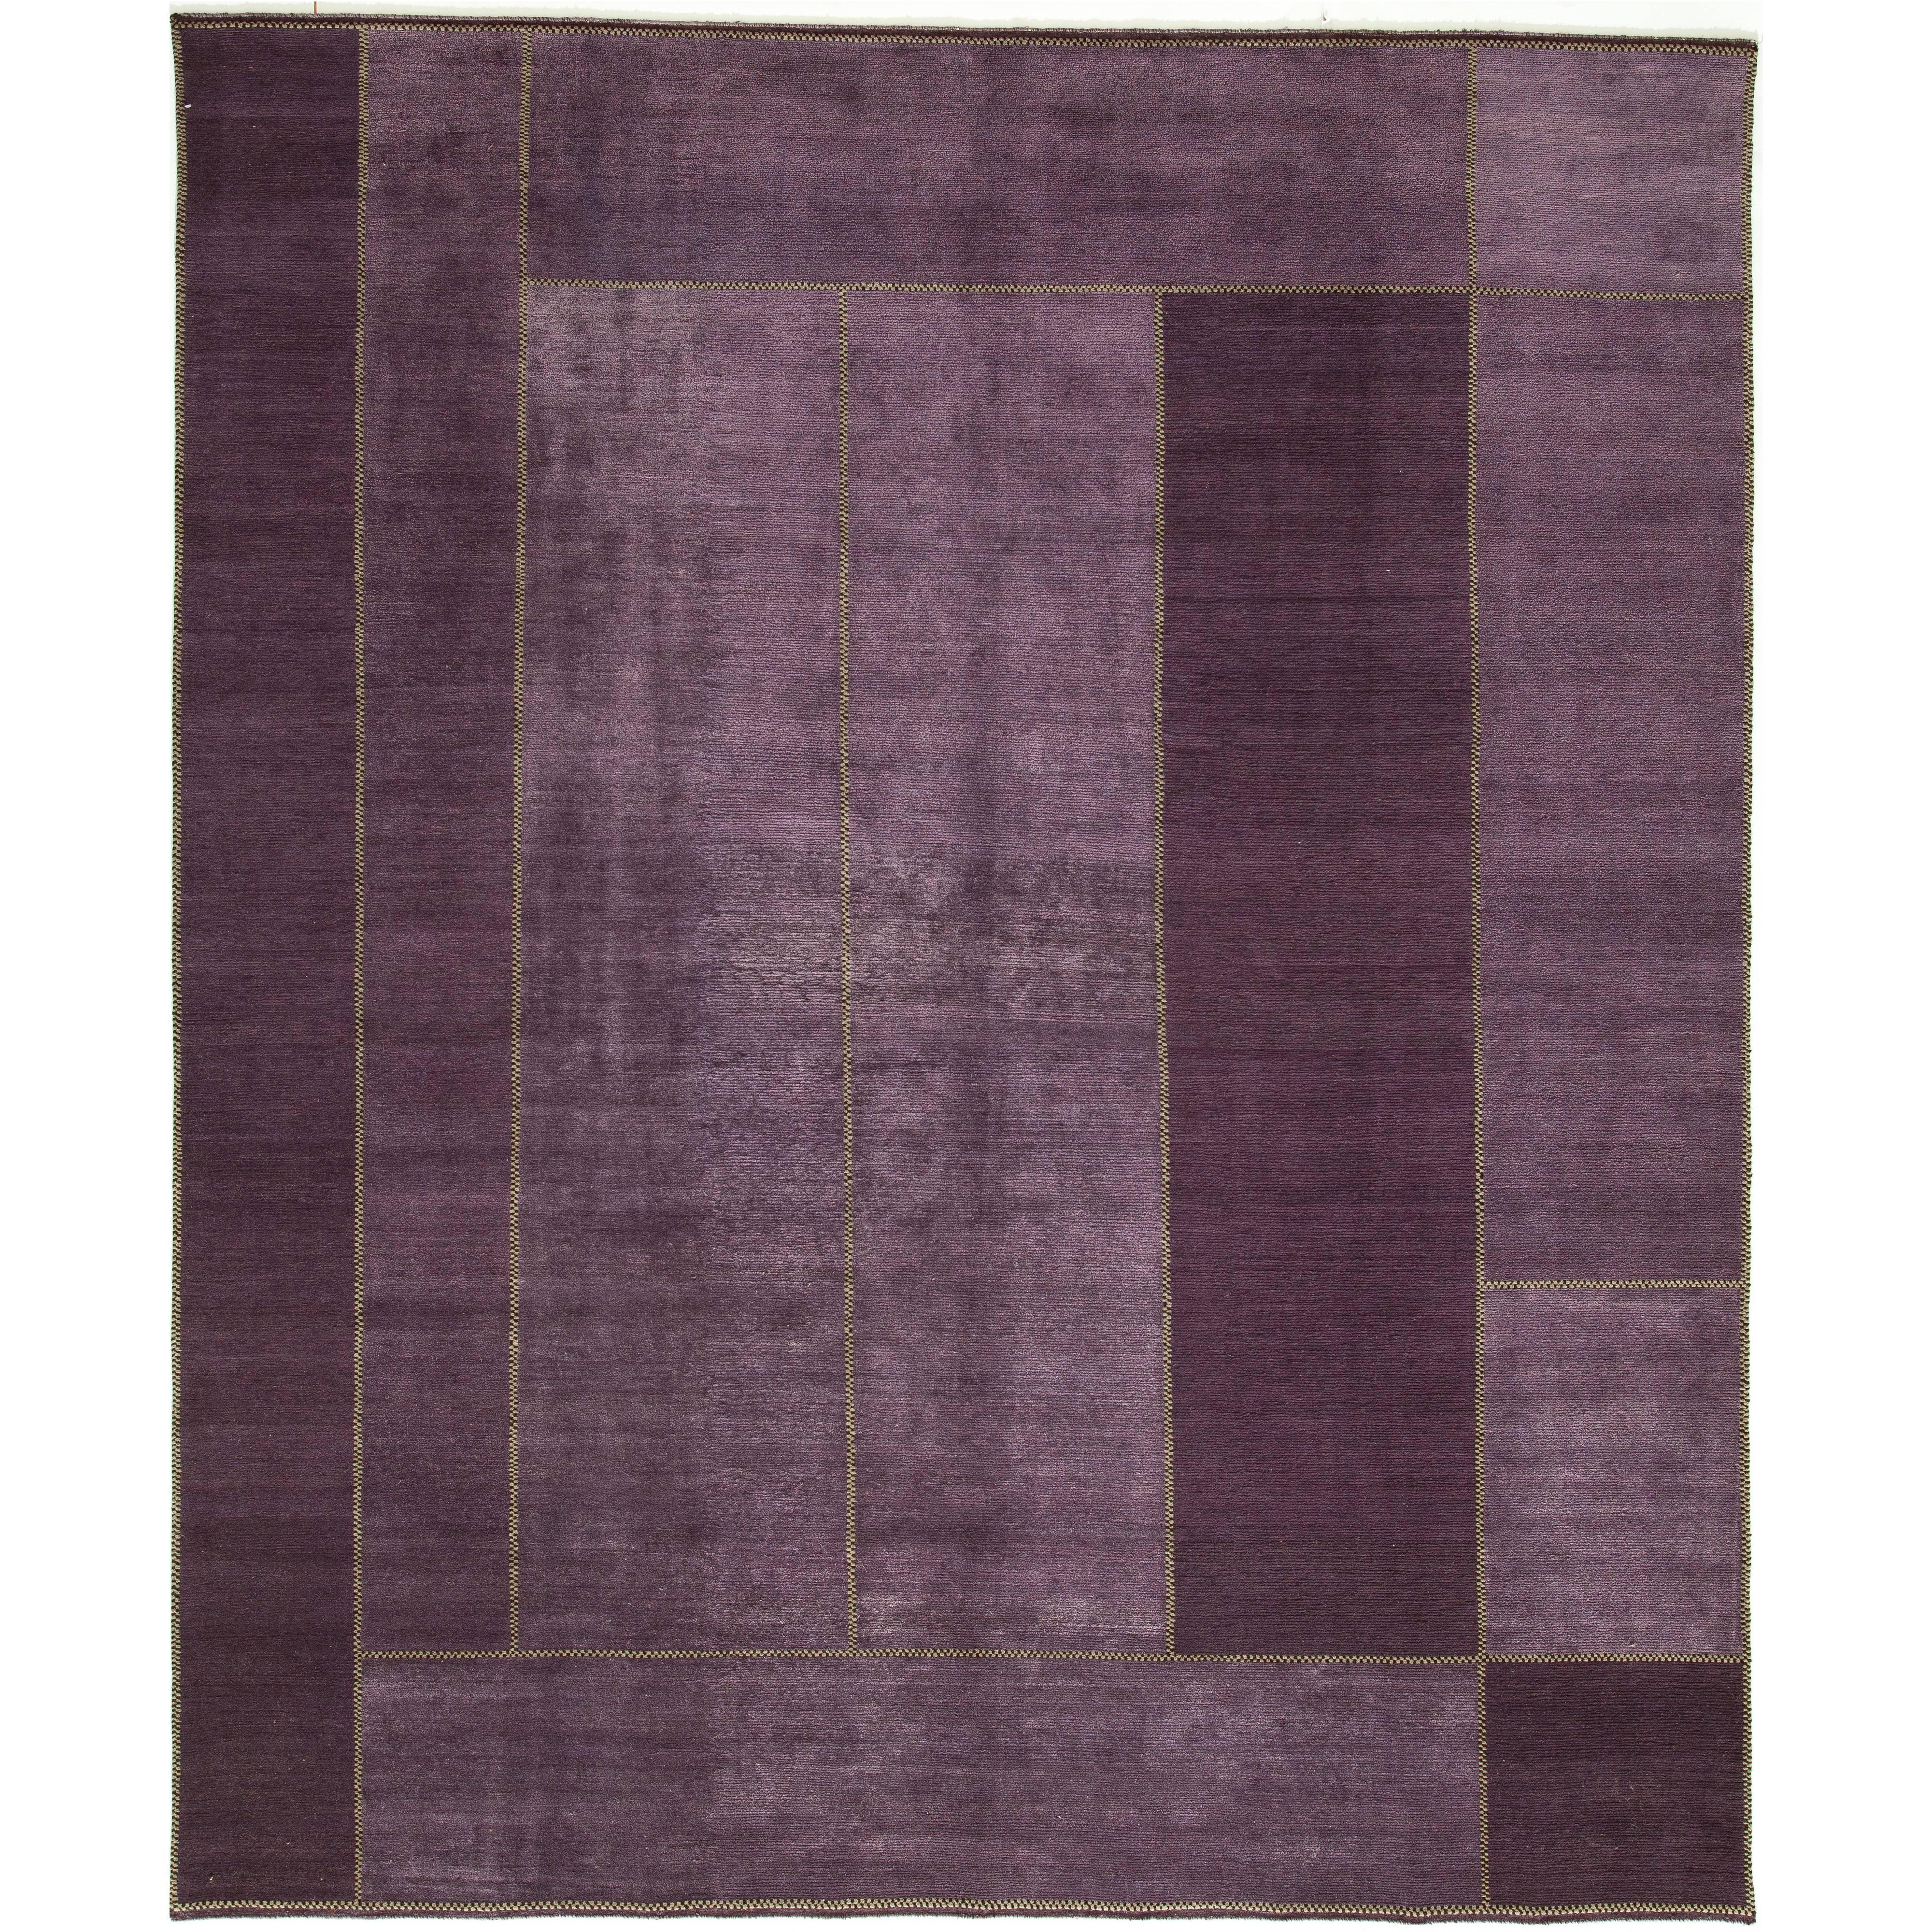 Kooches Oonah Quilt Rug For Sale